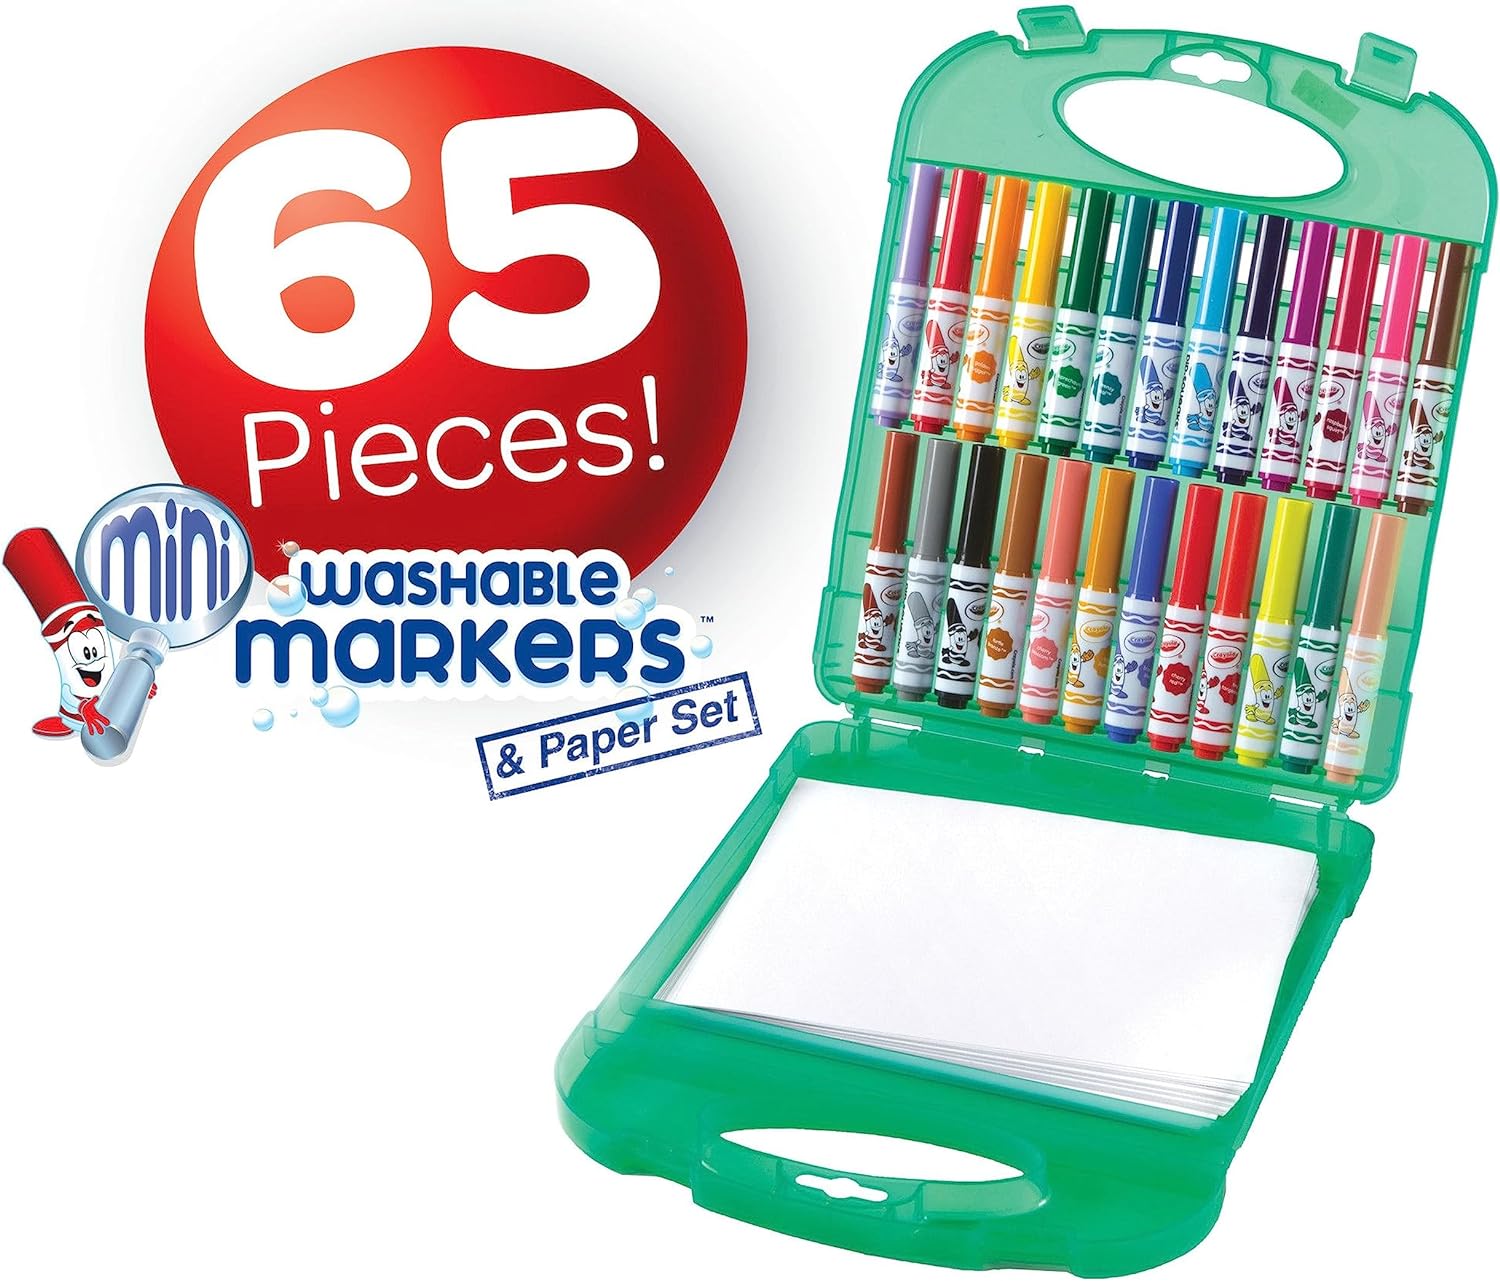 Crayola Pip Squeaks Marker Set (65ct), Washable Markers for Kids, Kids Art Supplies, Holiday Gift for Kids, Mini Markers, Stocking Stuffer, 4+